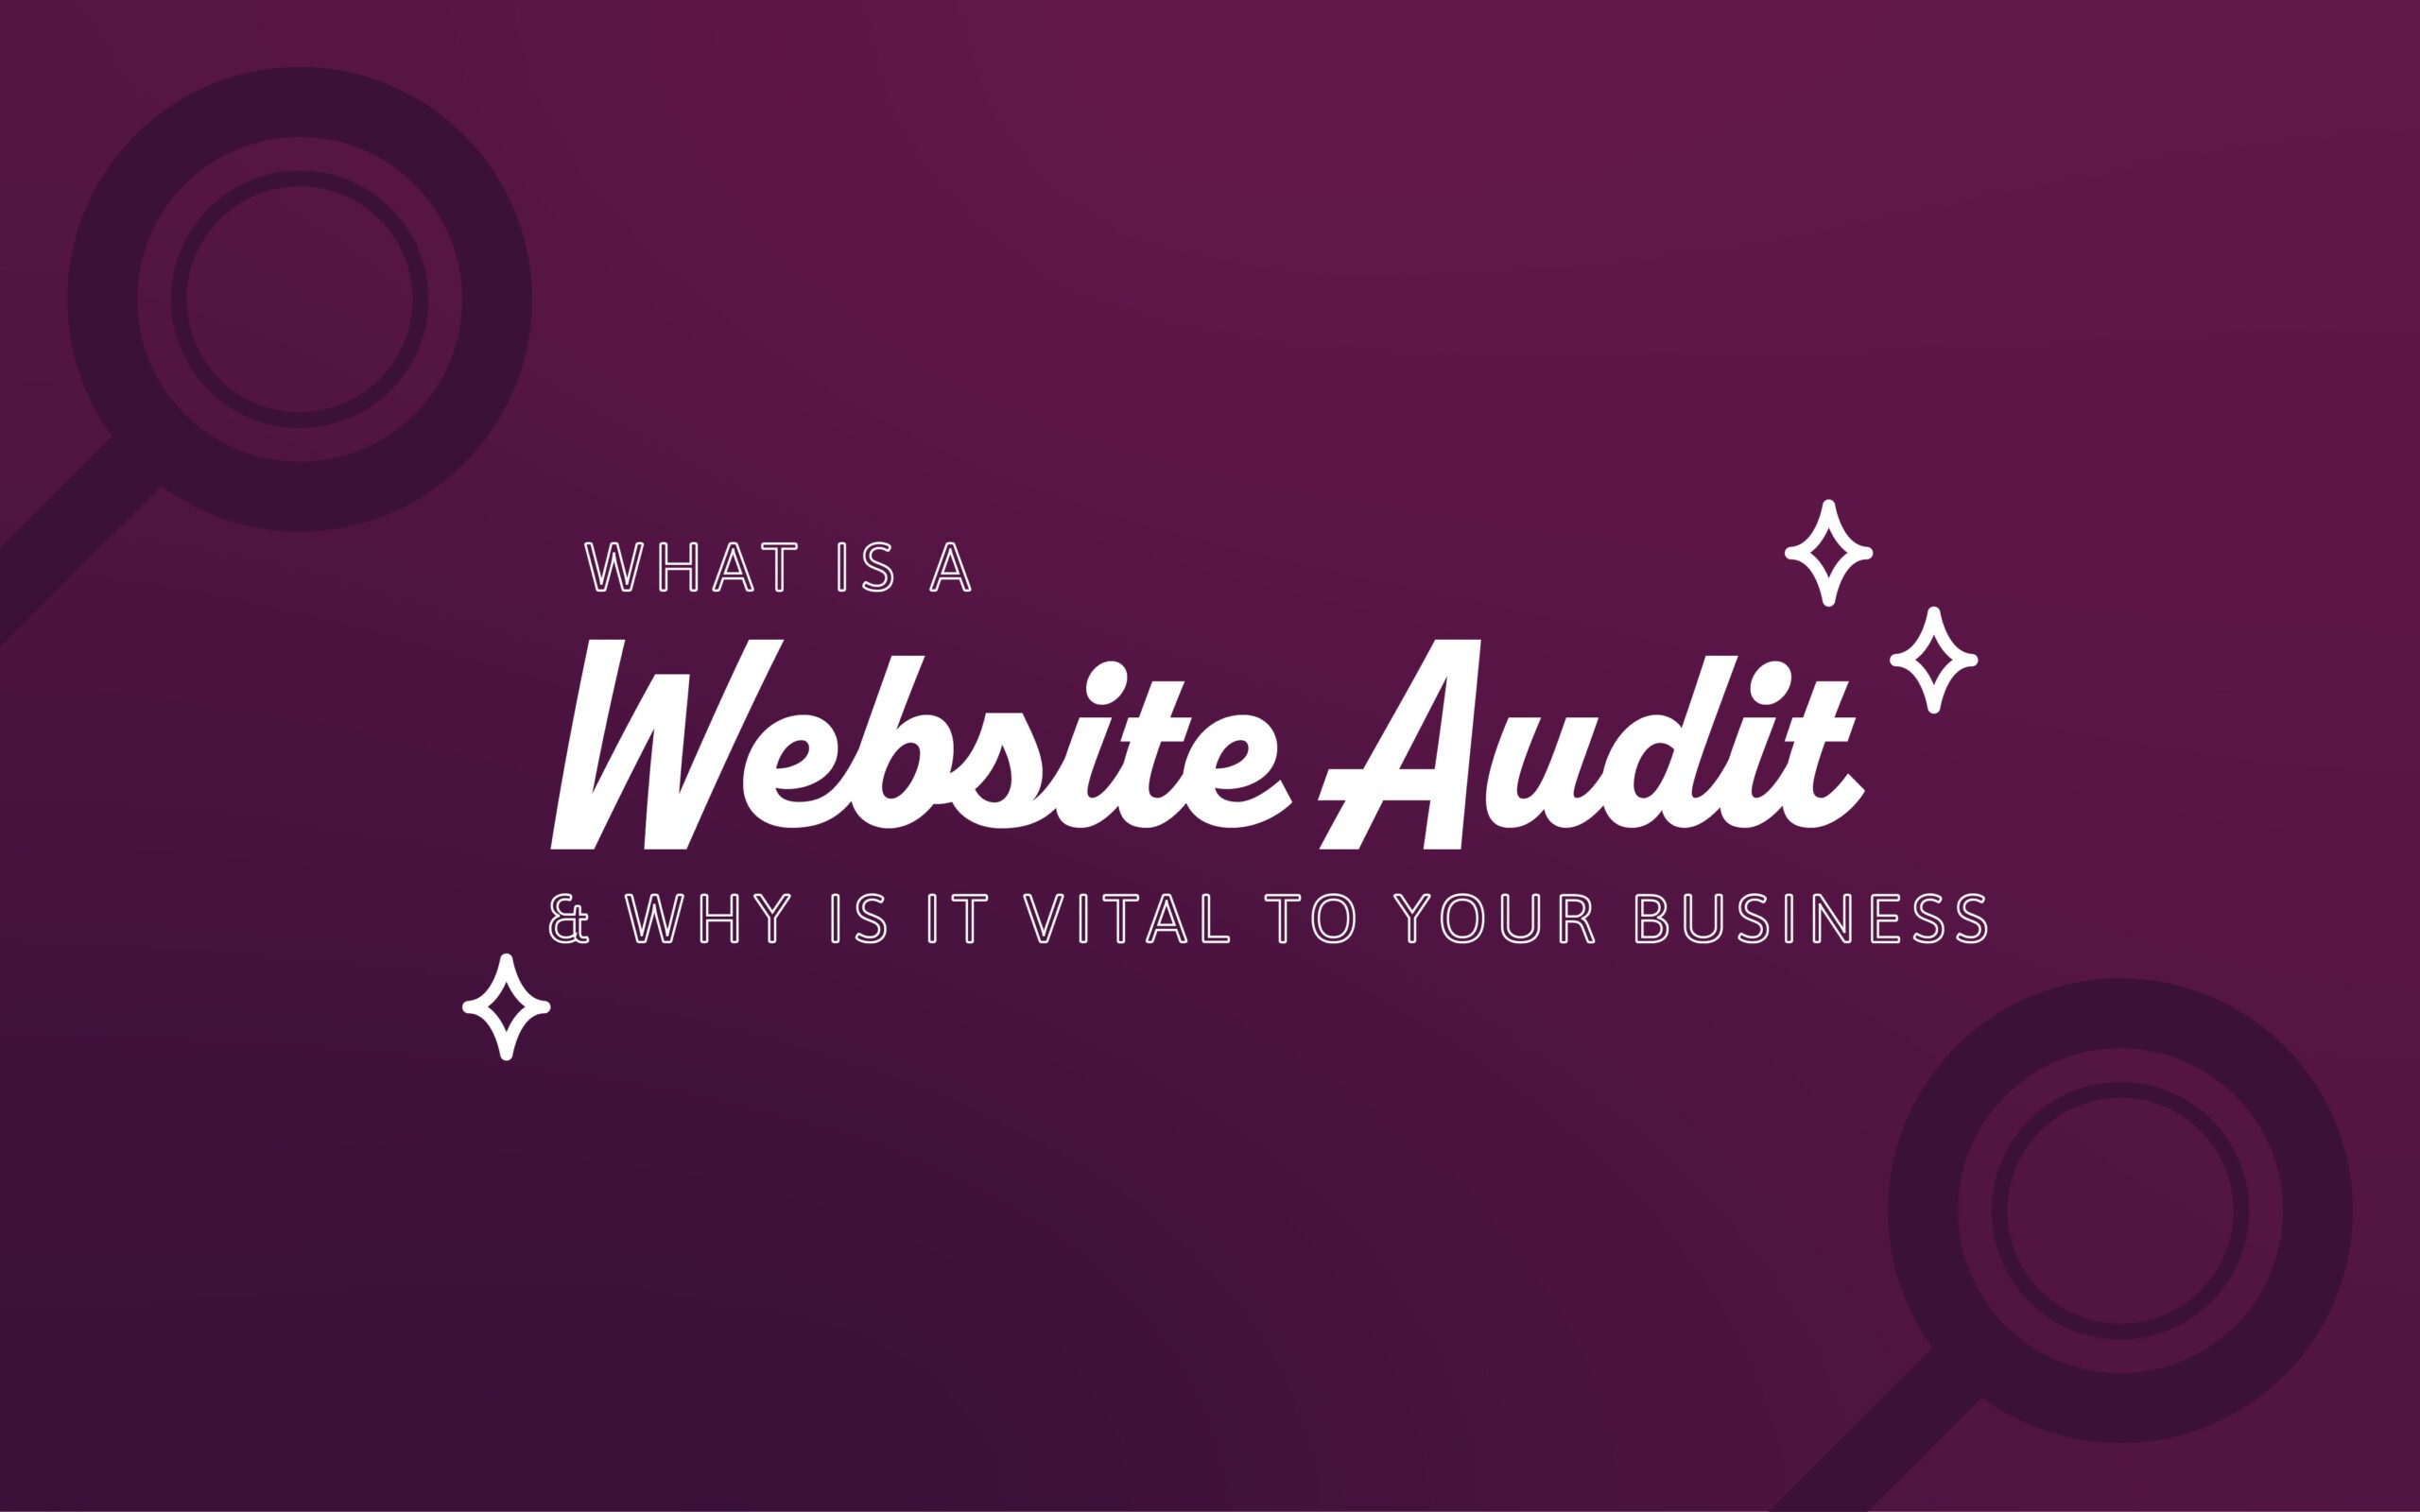 image saying 'what is a website audit?"